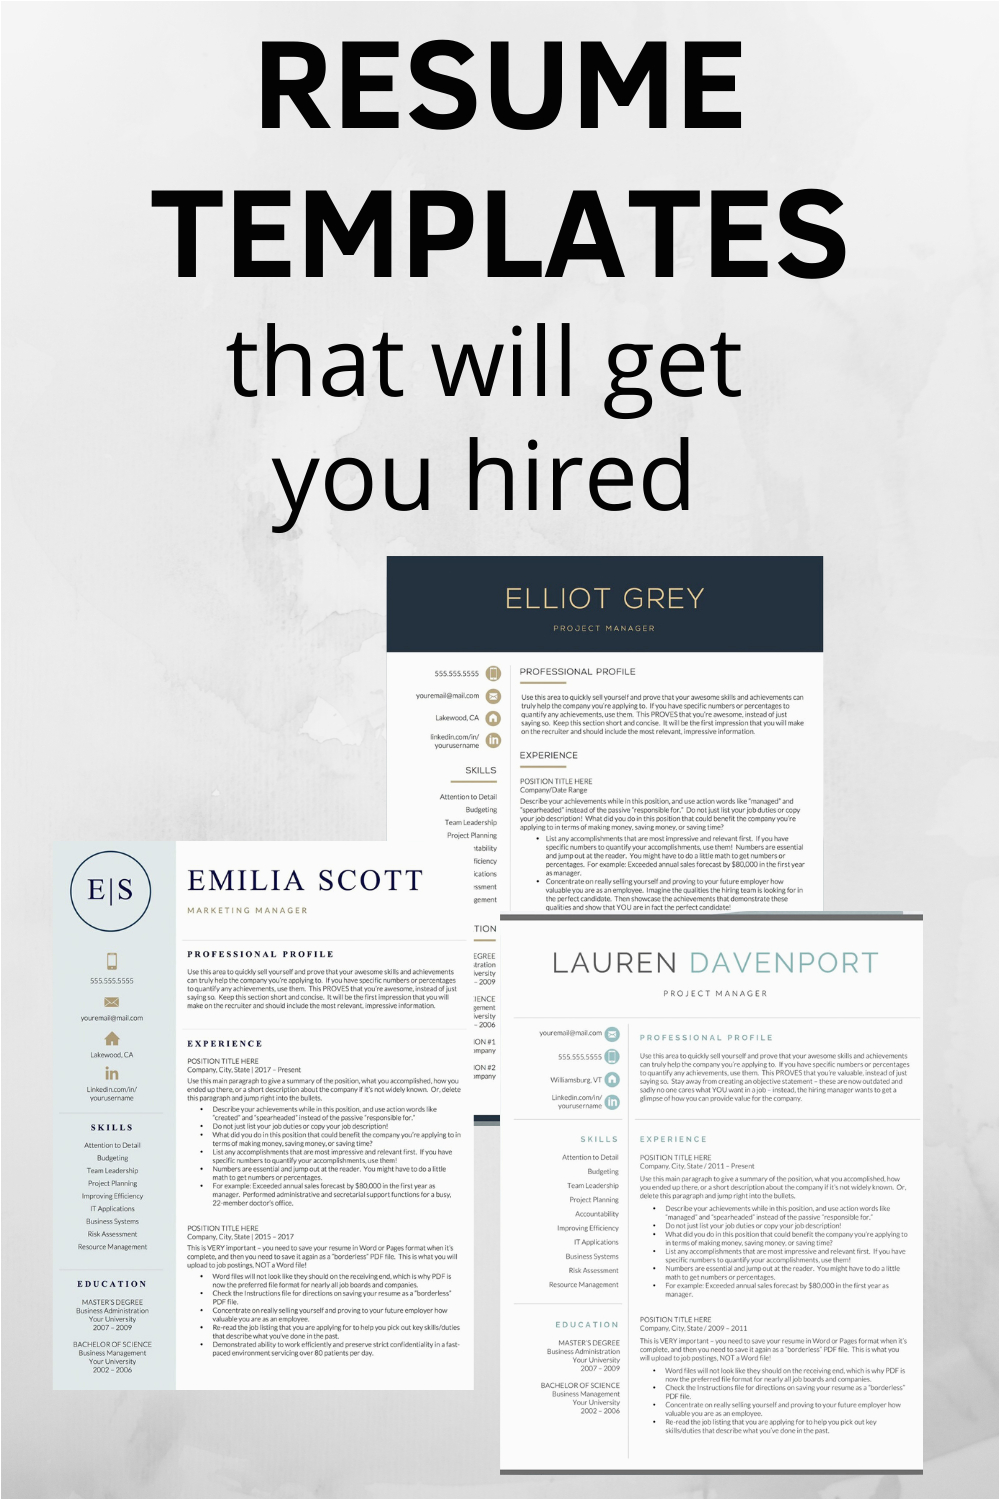 Resume Templates that Will Get You Hired the Best Resume Examples that Will Get You Hired In 2020